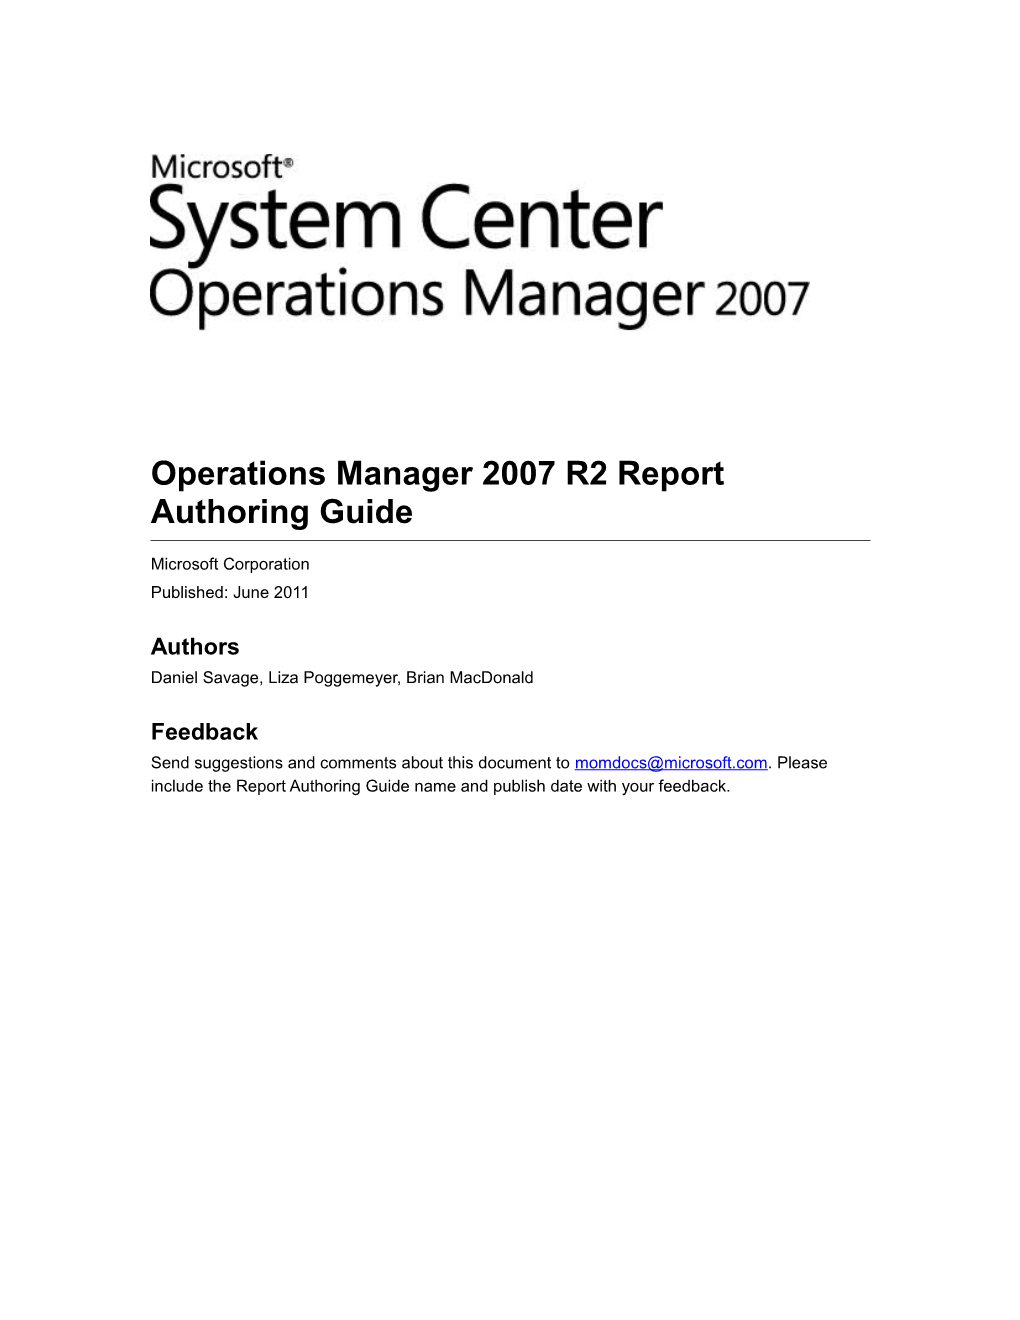 Operations Manager 2007 R2 Report Authoring Guide